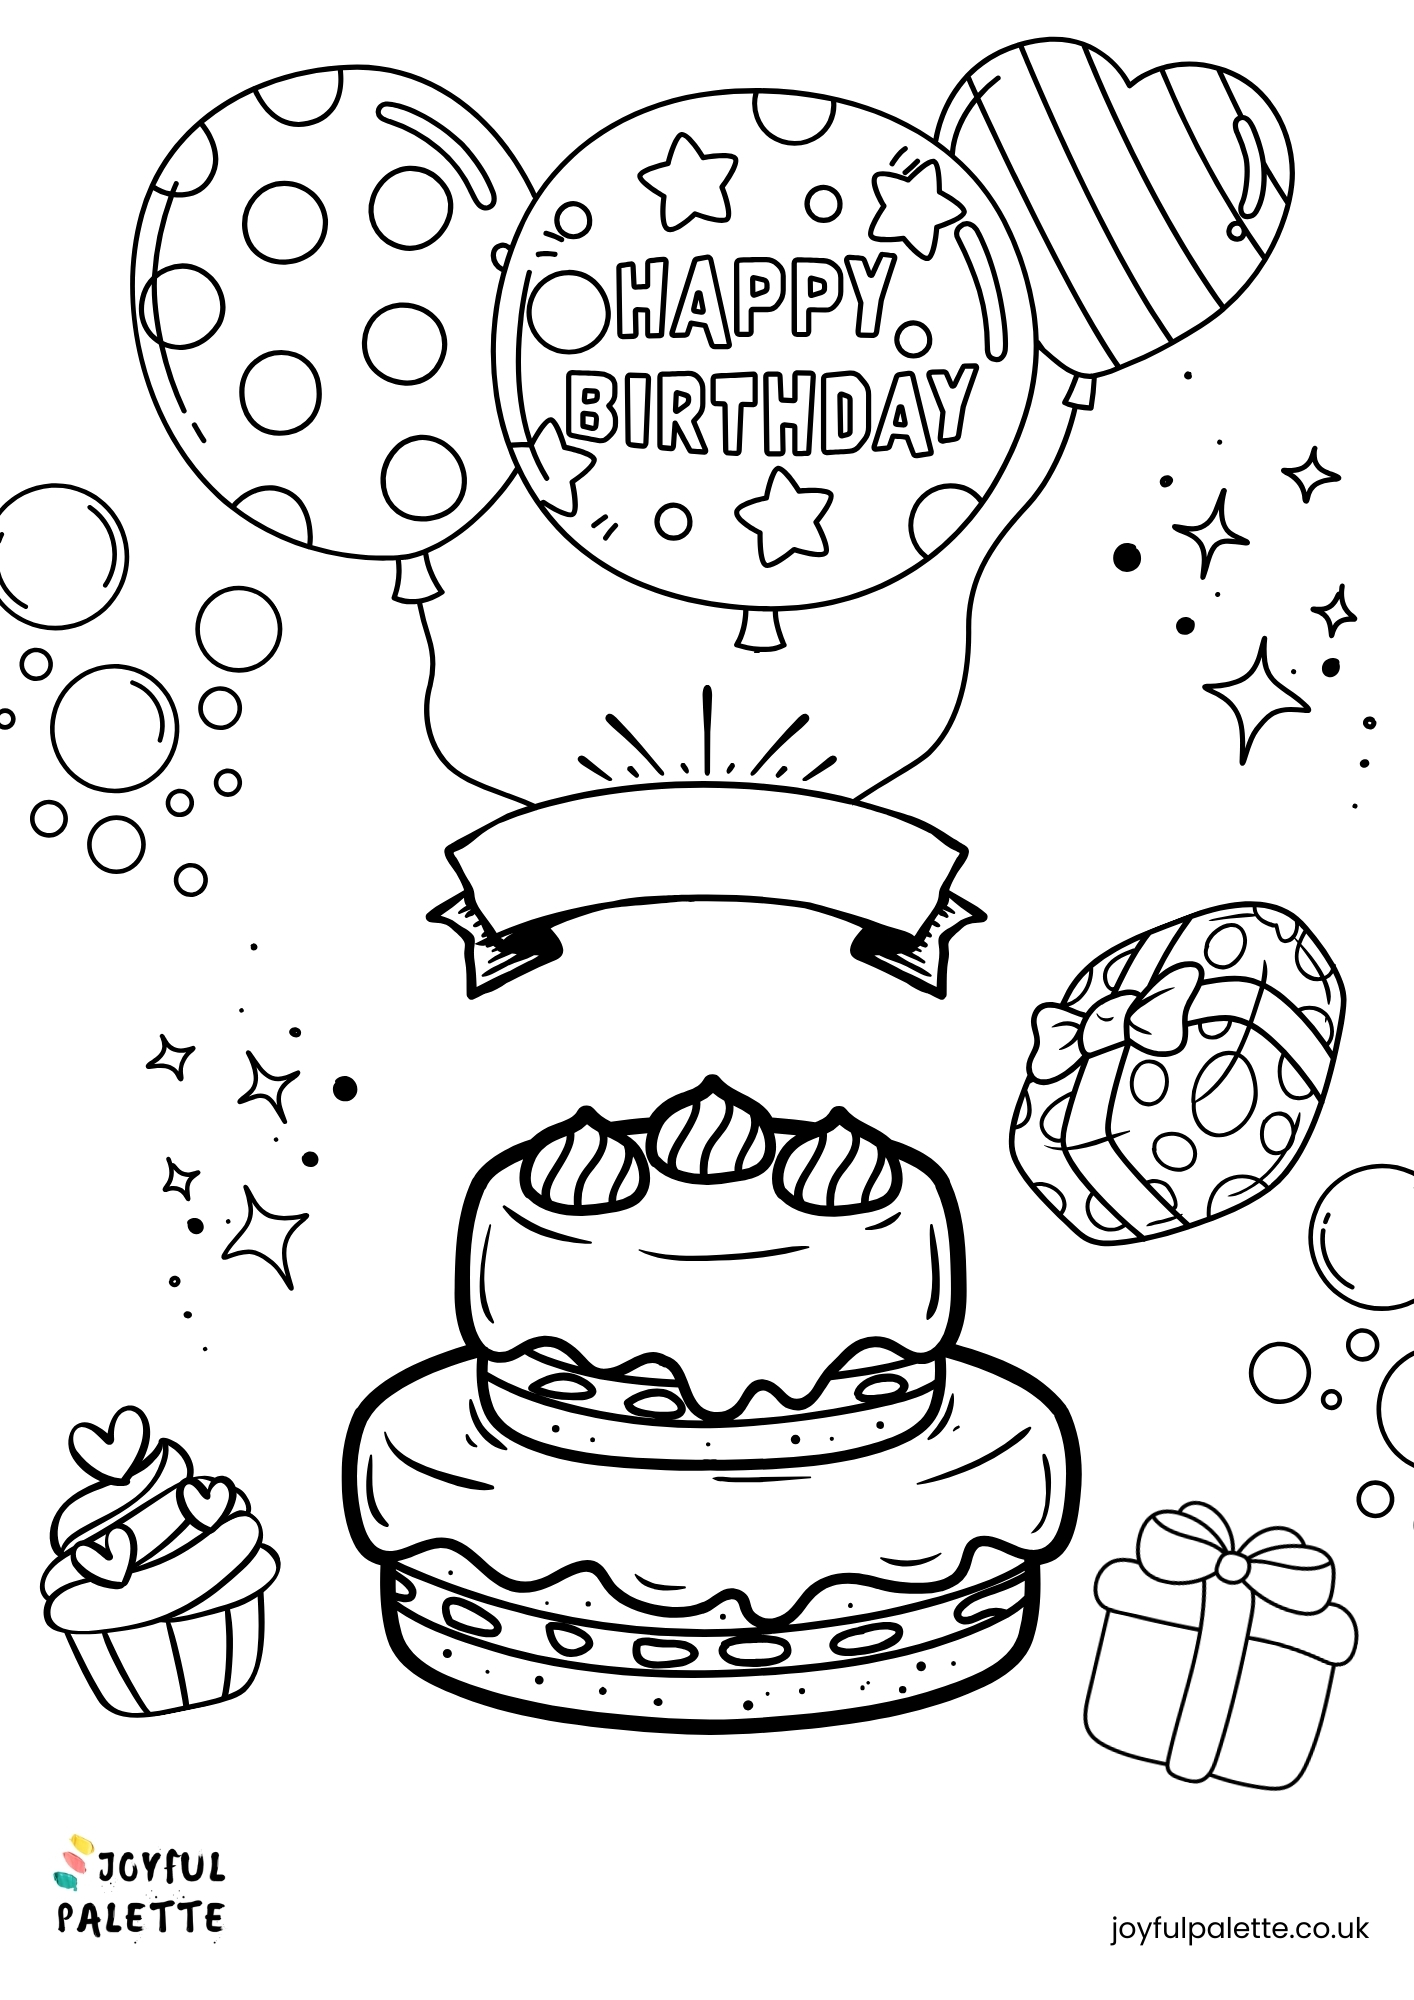 birthday cake coloring pages